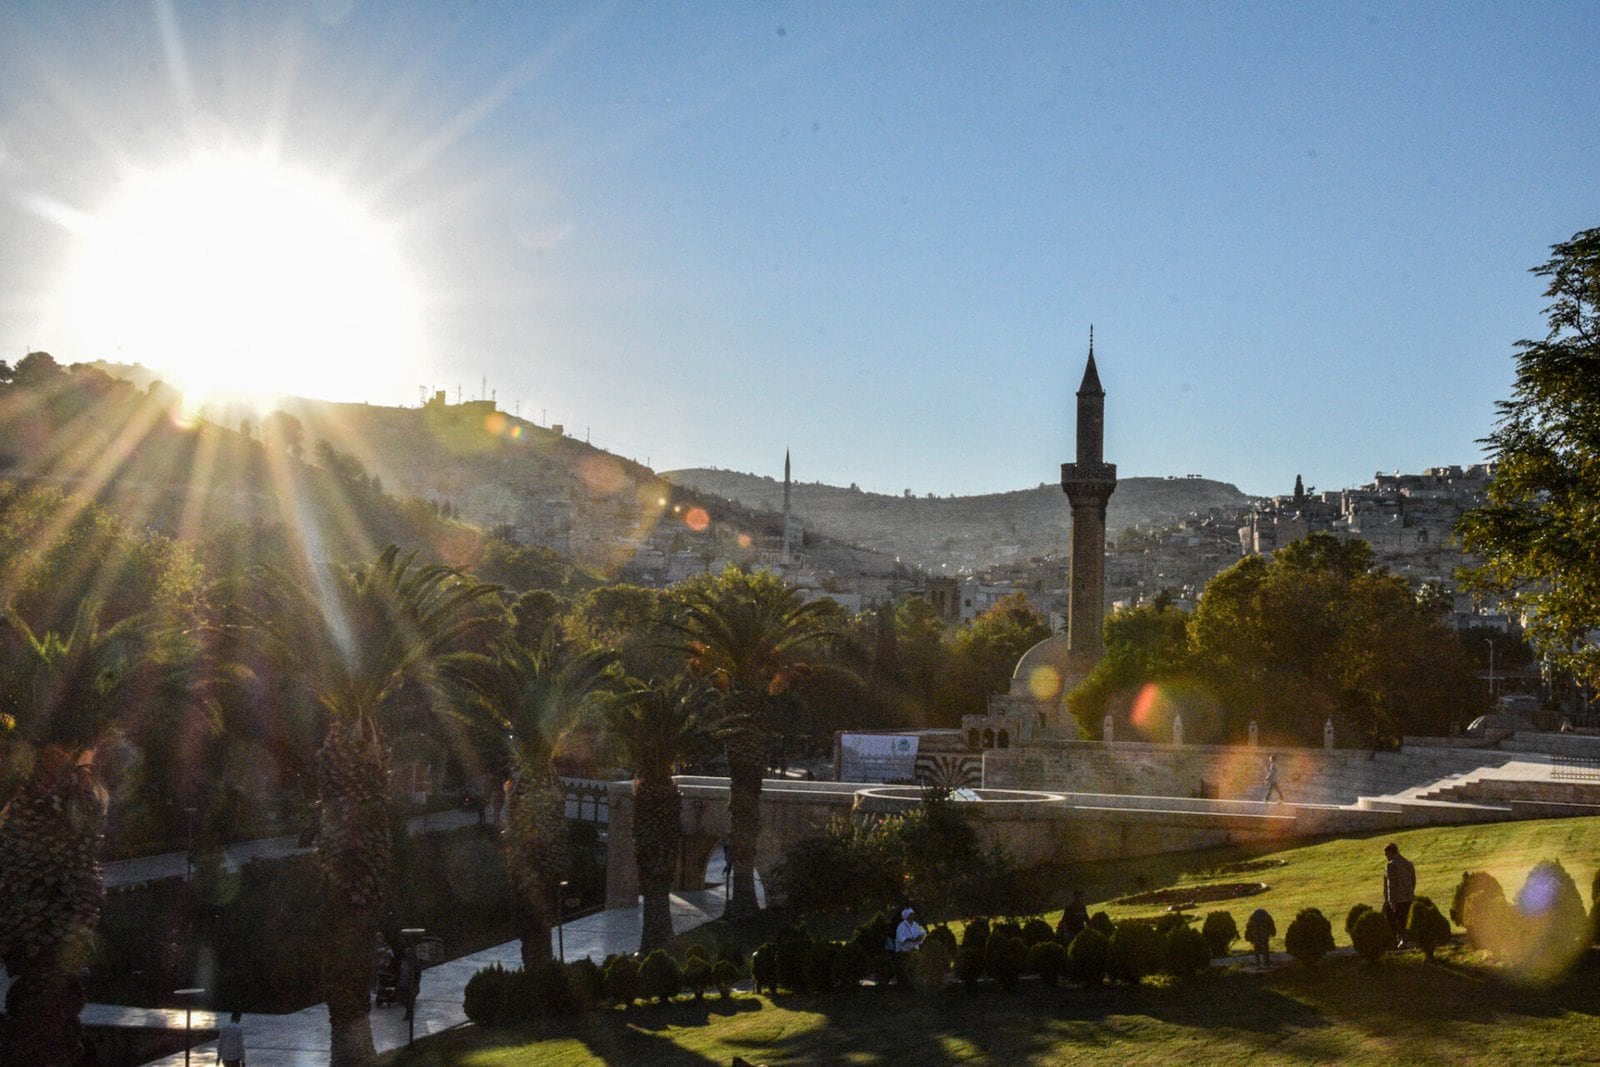 the sun stands blazing above the verdant parks of Sanliurfa